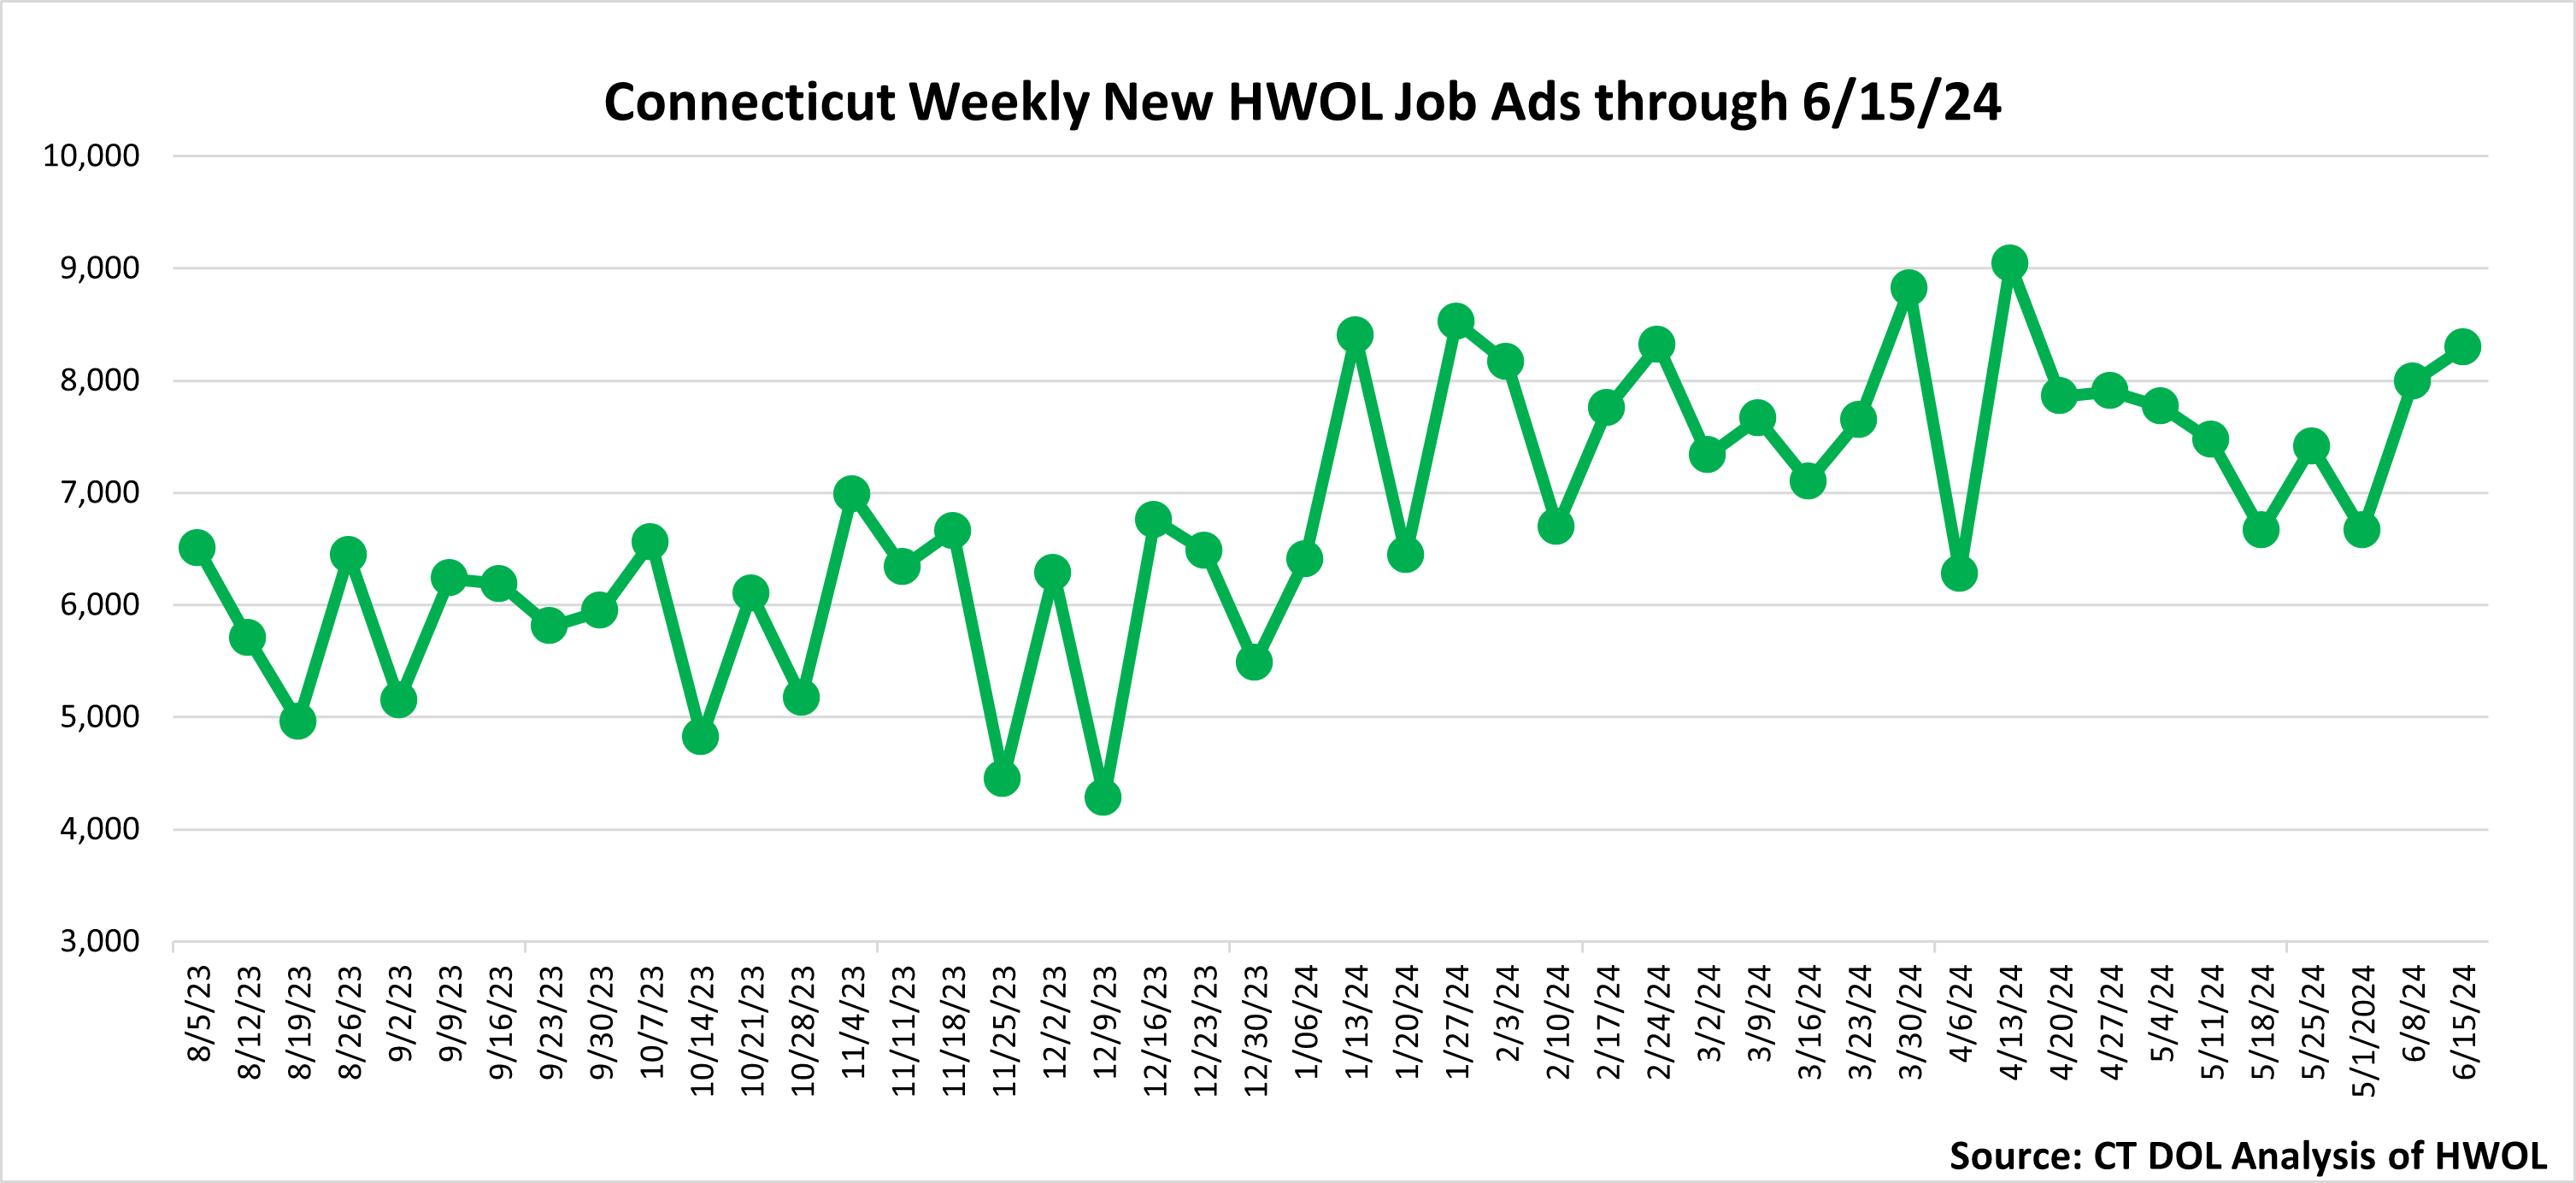 Connecticut Weekly Statewide New HWOL Job Ads through June 15th 2024